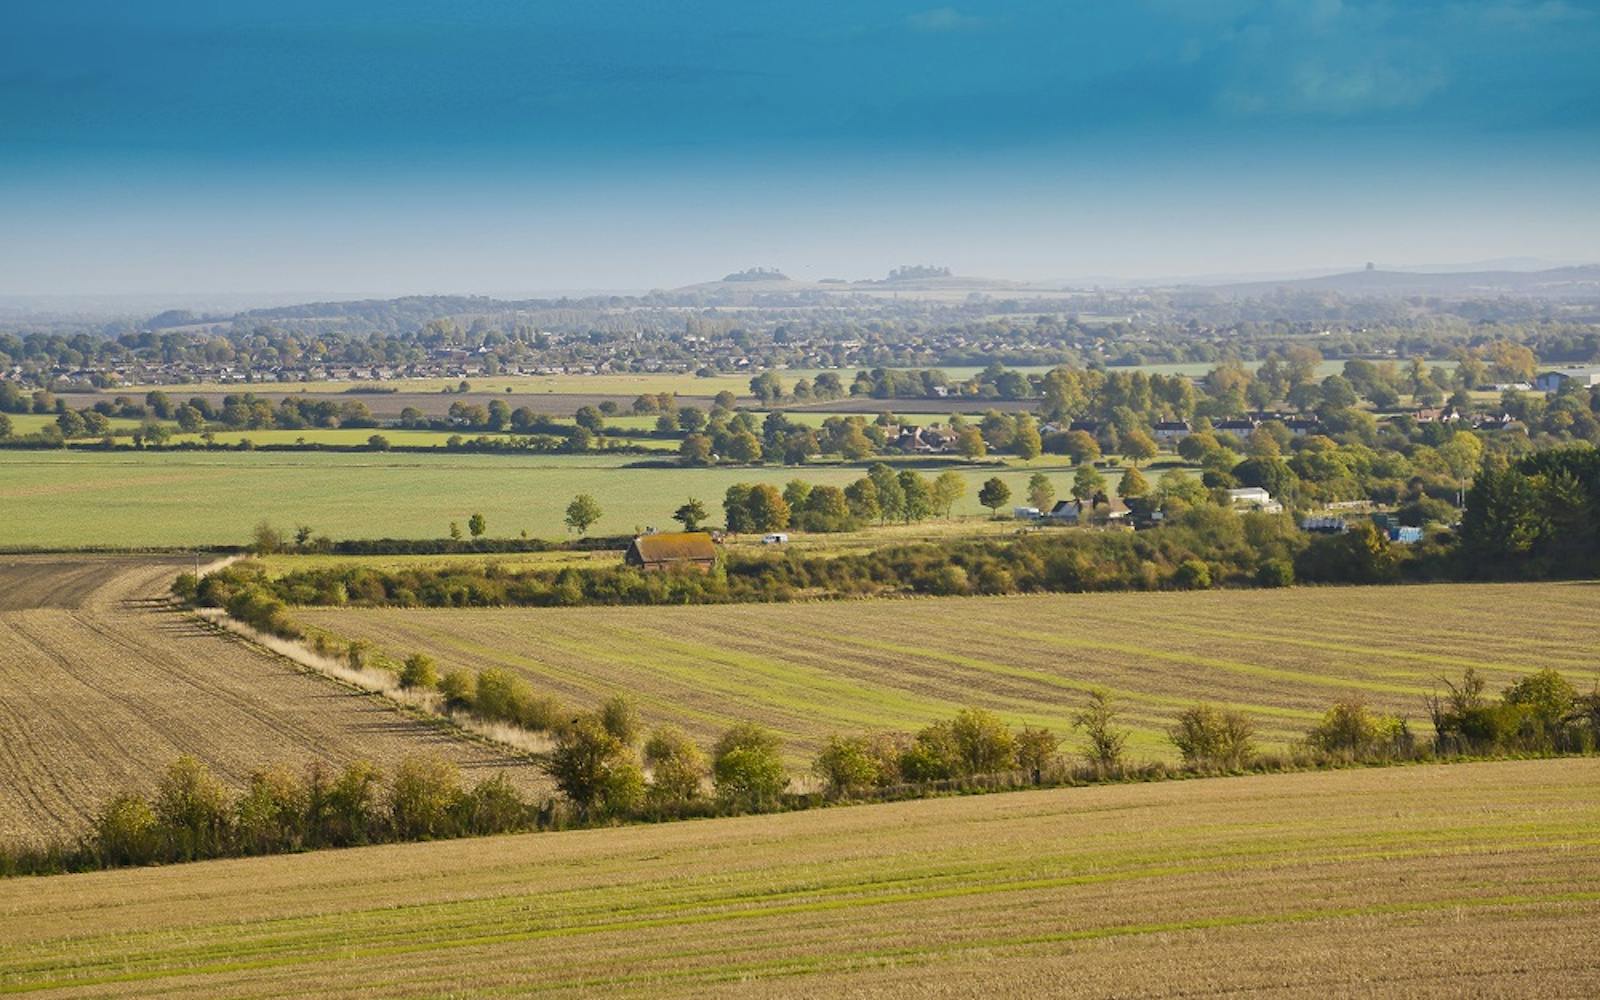 Panoramic view of the Oxfordshire countryside in autumn, featuring rolling fields, scattered trees, farmhouses, and a distant village nestled beneath a blue sky with wispy clouds